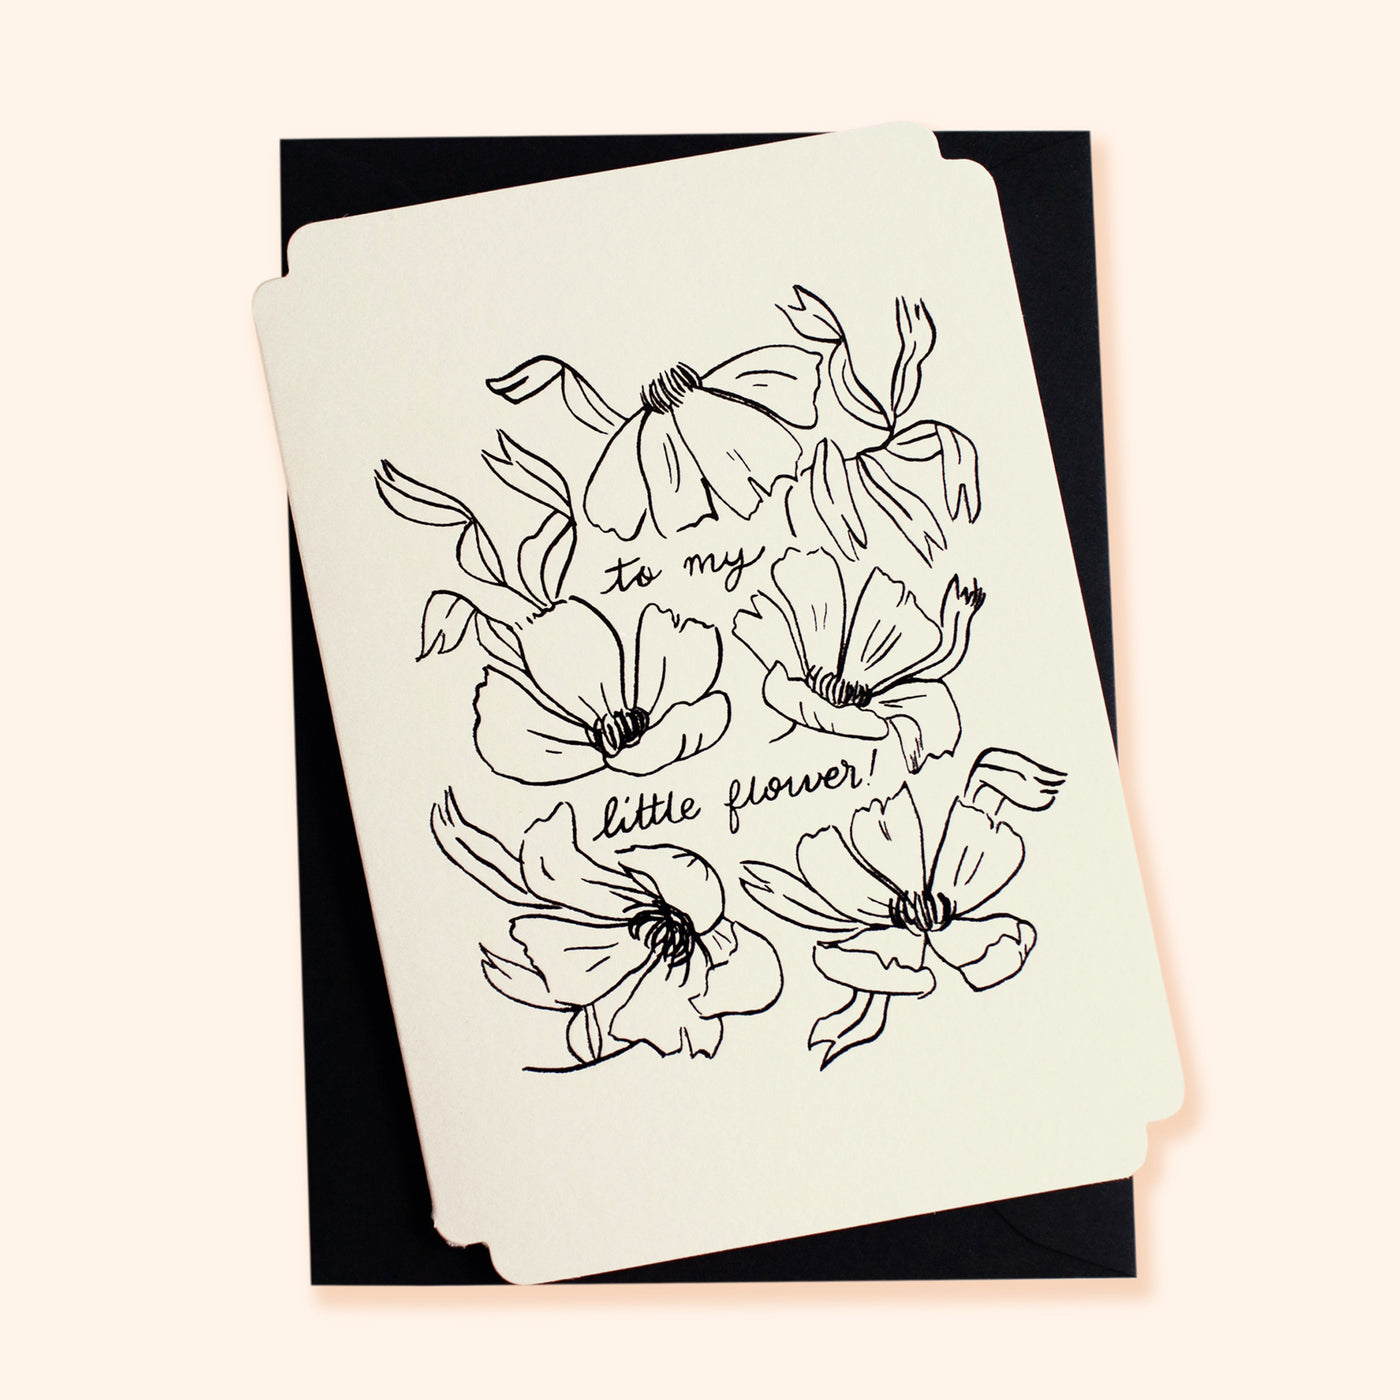 Black Floral Line Art Work A6 White Card With The Words To My Little Flowers With A Black Envelope - Annie Dornan Smith